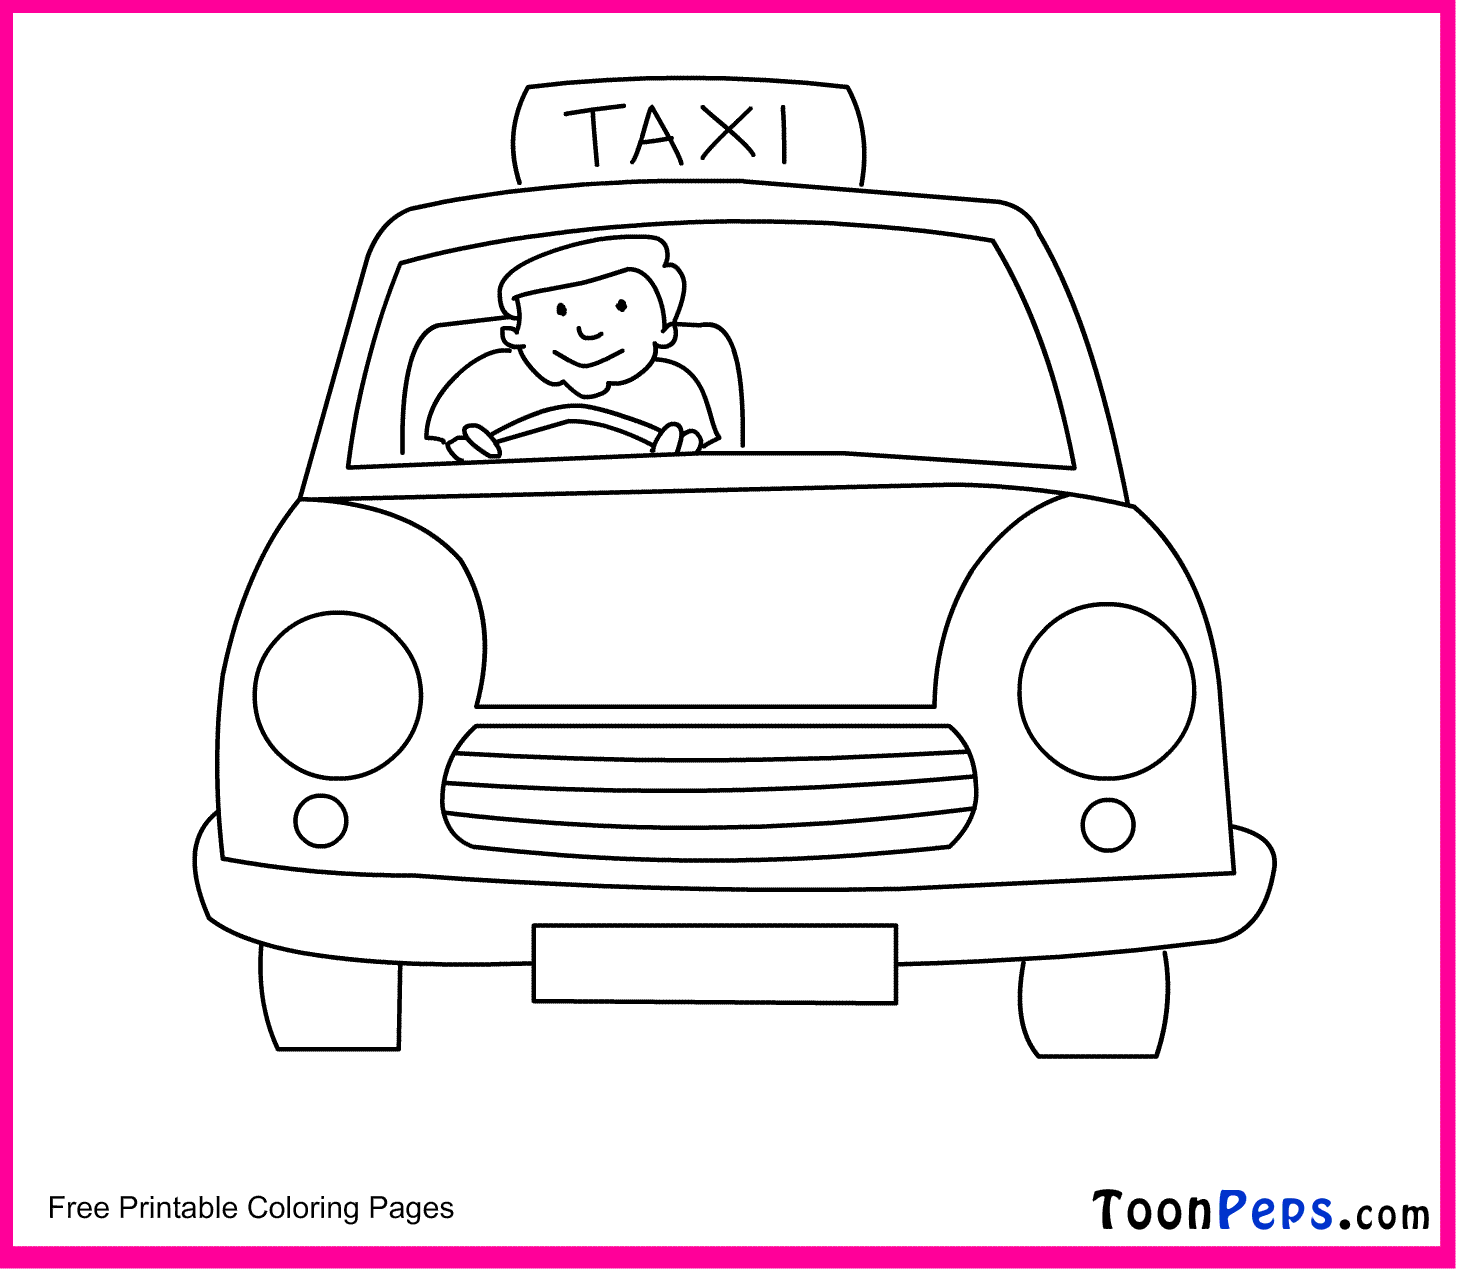 taxi cab coloring pages - photo #18